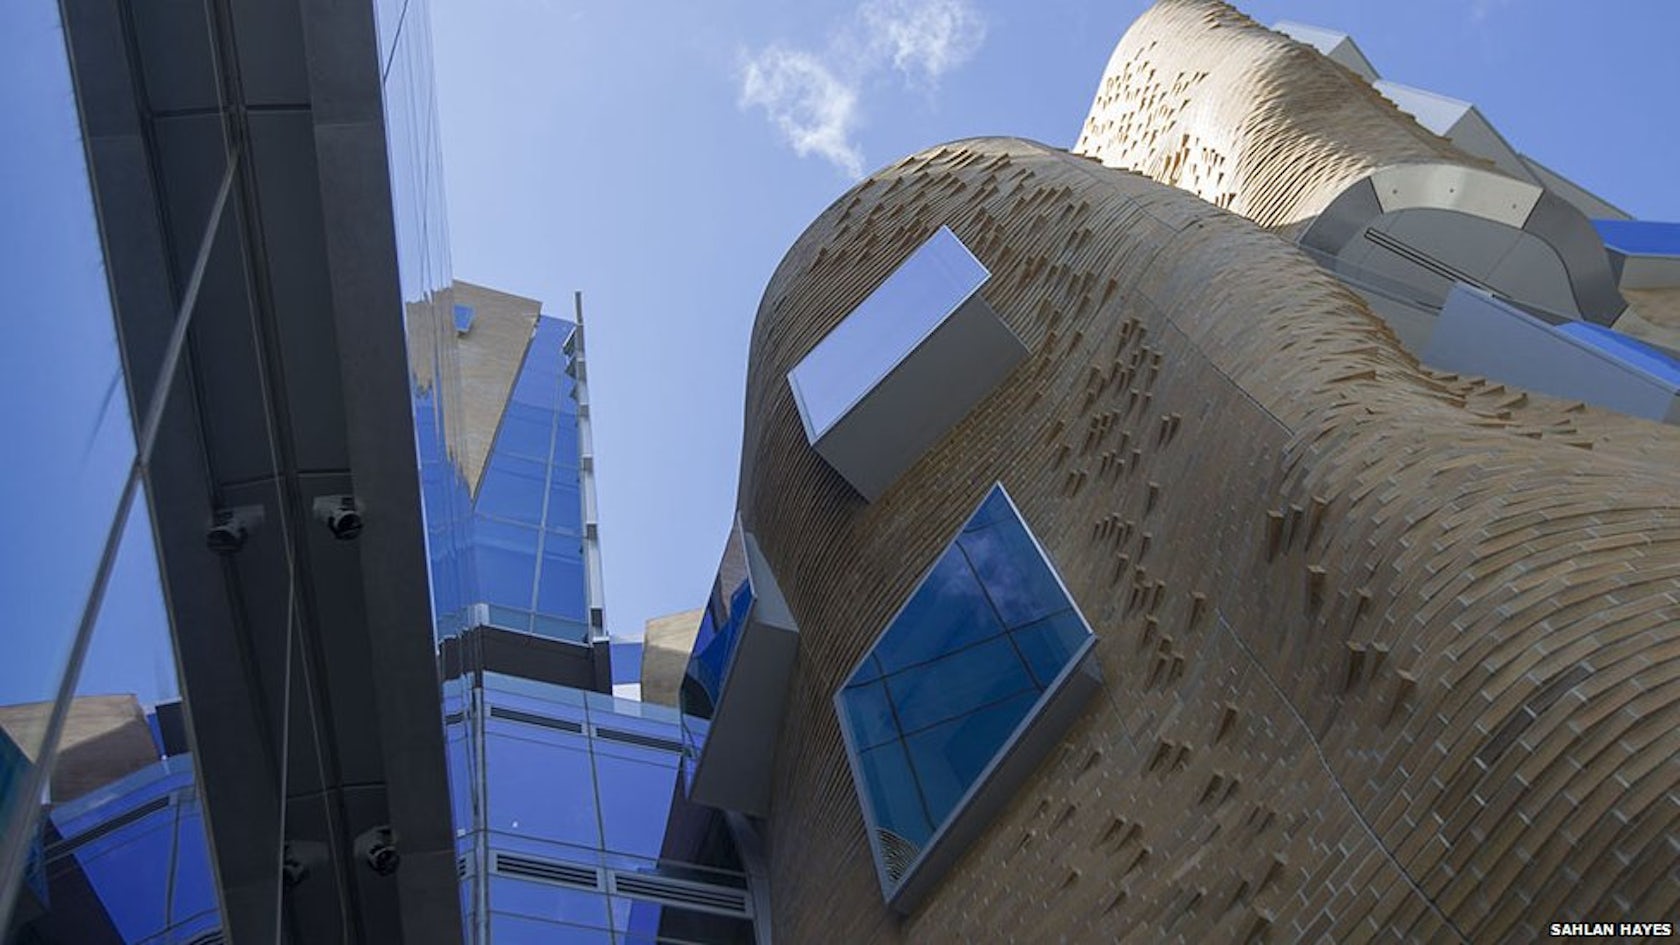 Frank Gehry's paper bag – a new architectural icon for Australia?